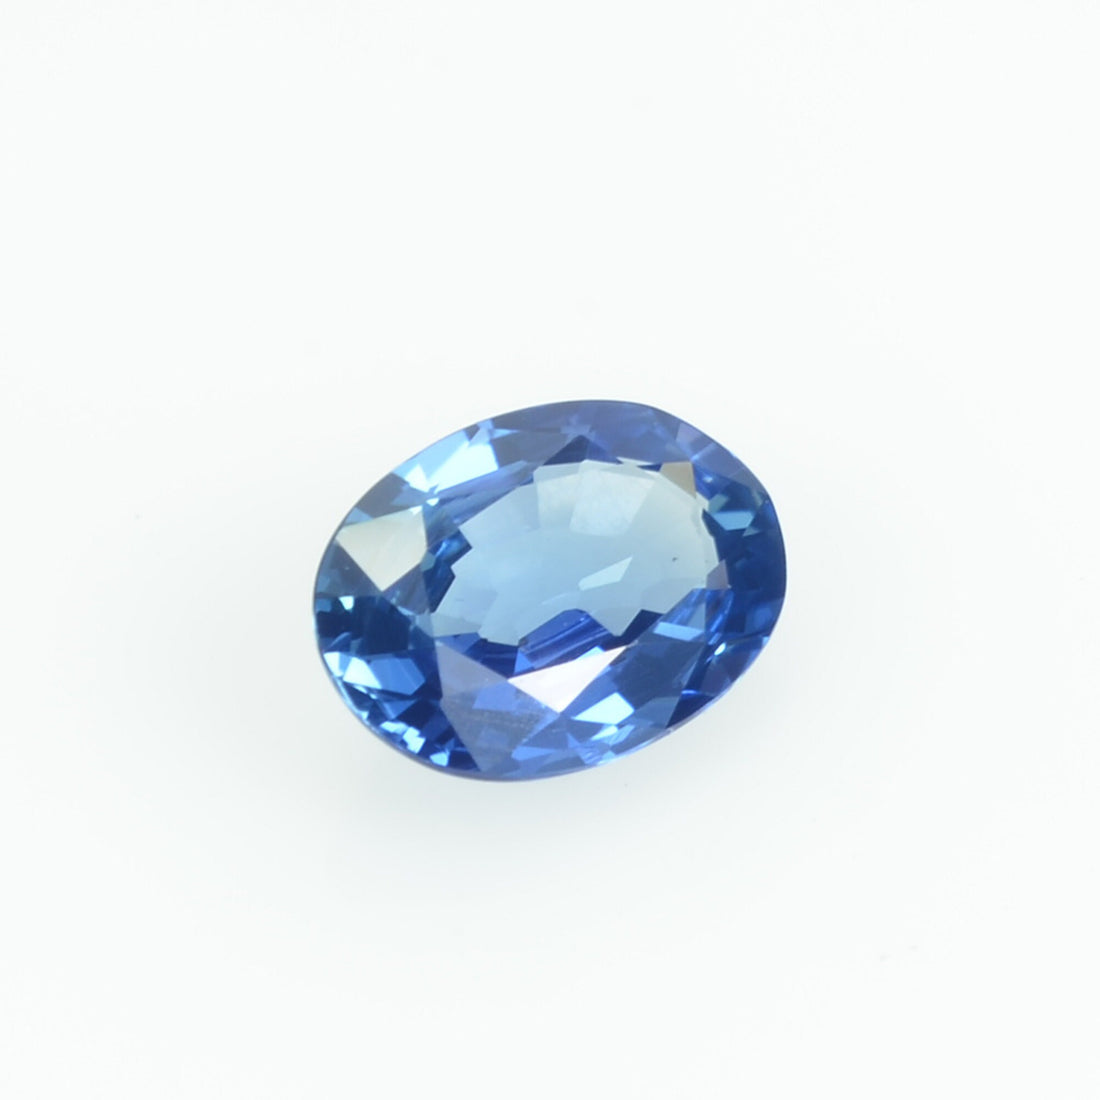 0.80 cts natural blue sapphire loose gemstone oval cut